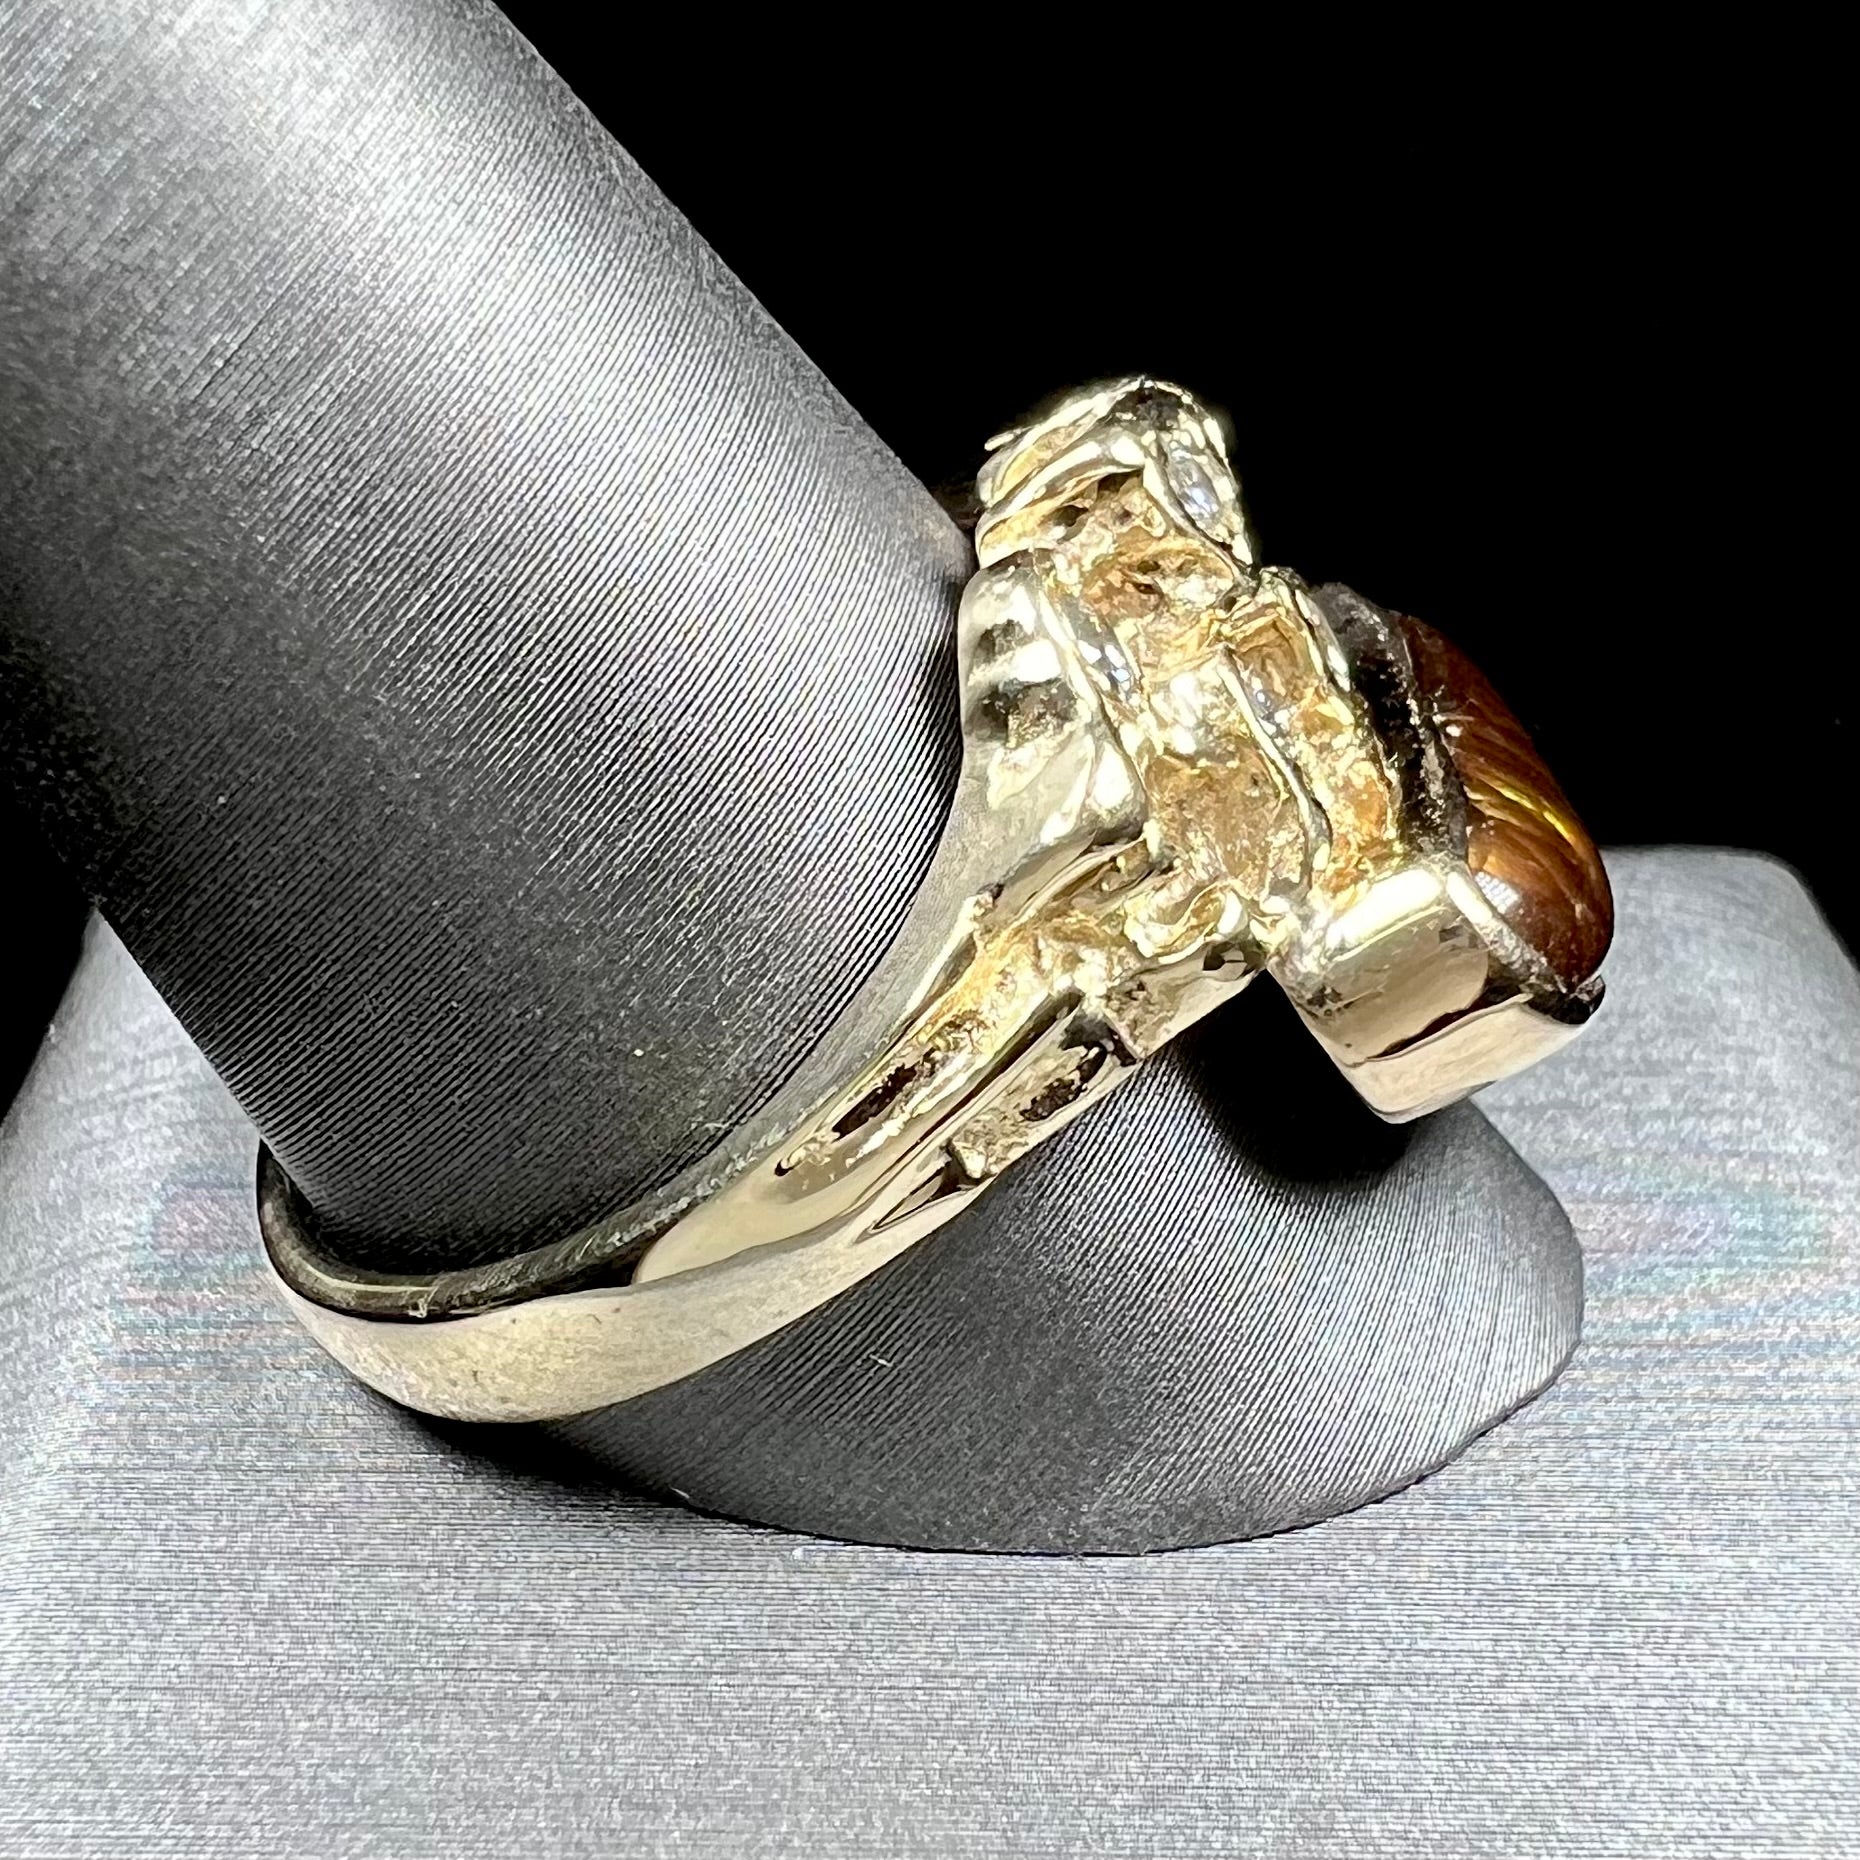 A ladies' nugget style yellow gold Mexican fire agate and diamond ring.